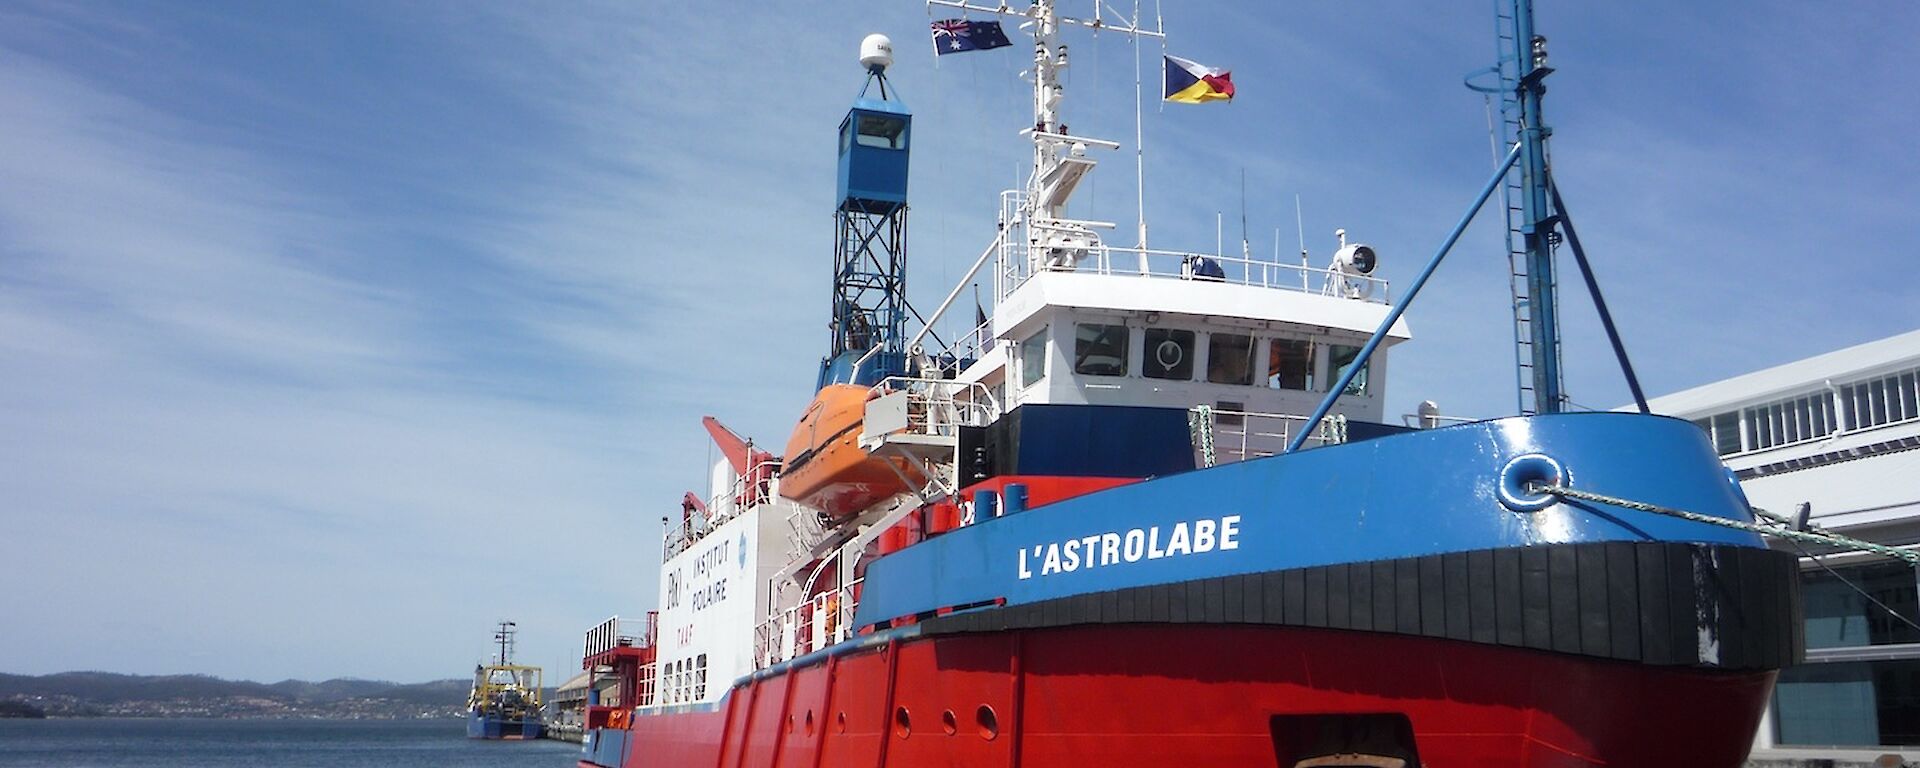 L'Astrolabe, brightly painted red, white and blue, tied up at the wharf just prior to departure form Hobart